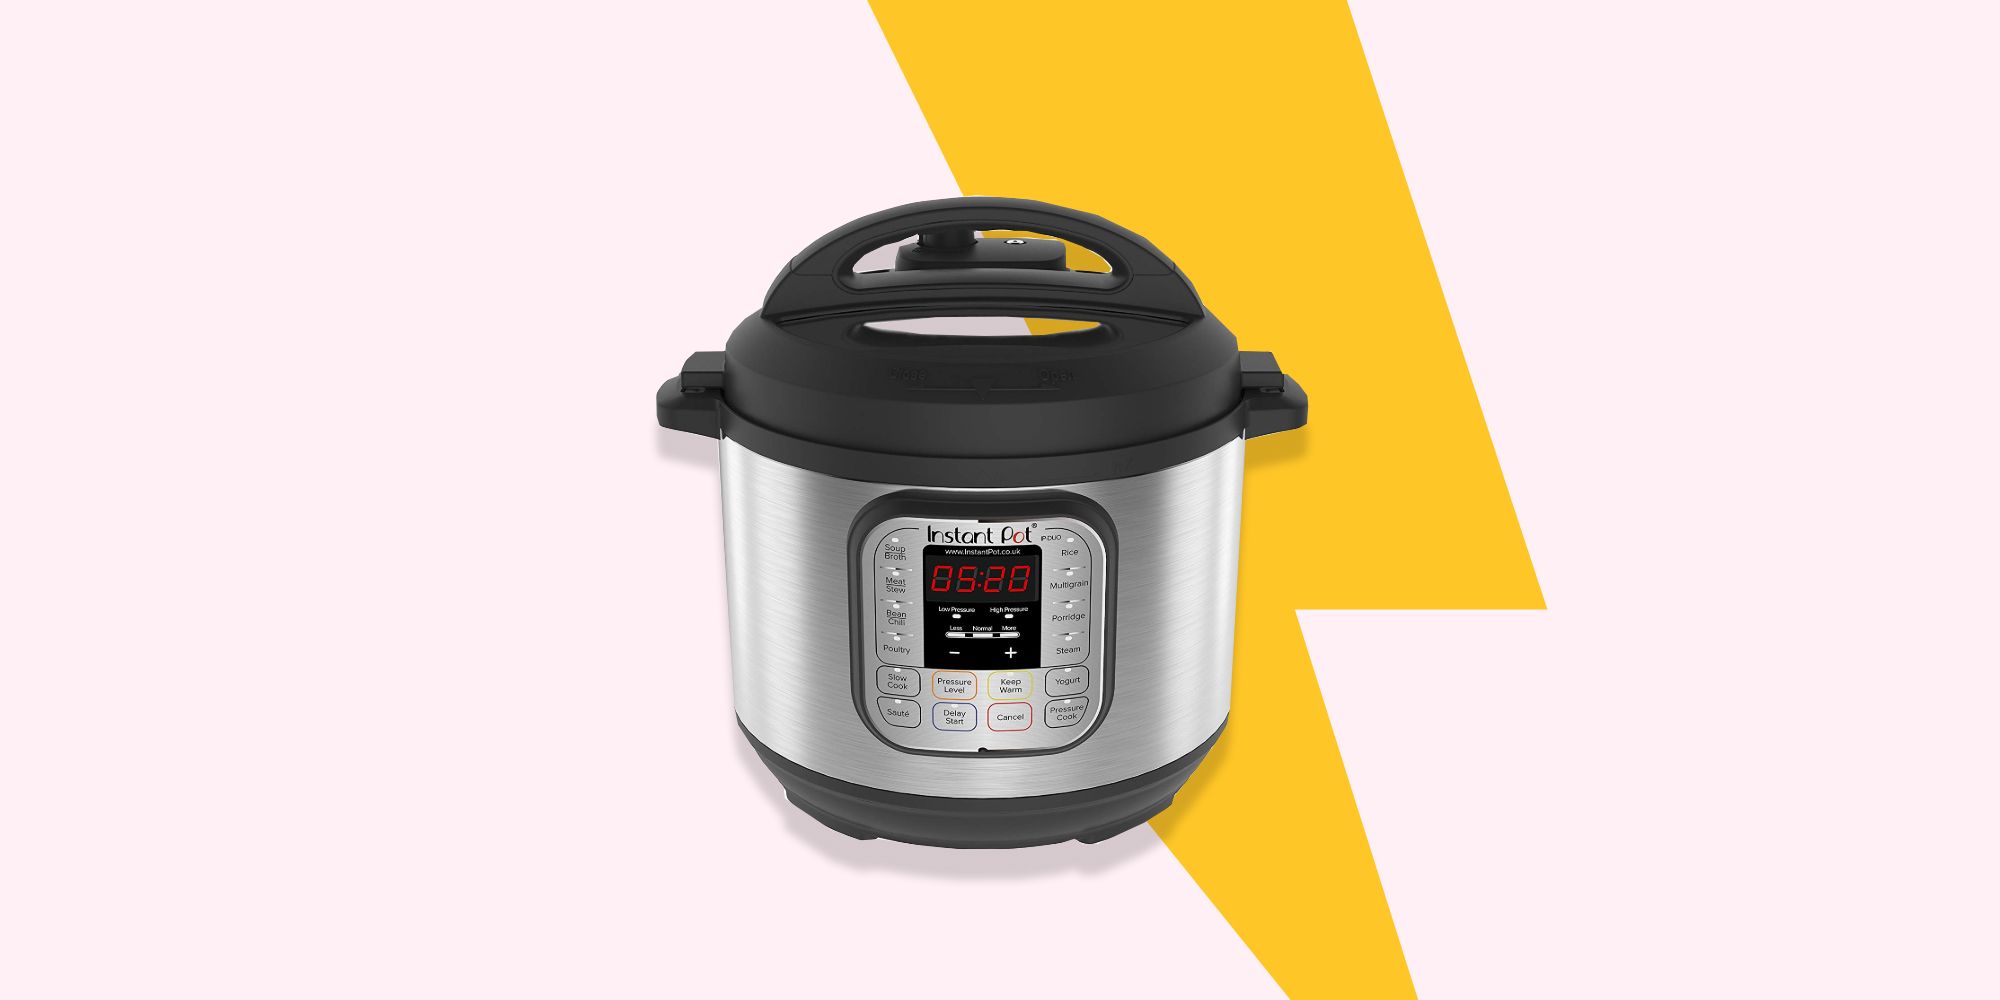 Small appliance, Home appliance, Rice cooker, Pressure cooker, Product, Lid, Kitchen appliance, Slow cooker, Cookware and bakeware, 